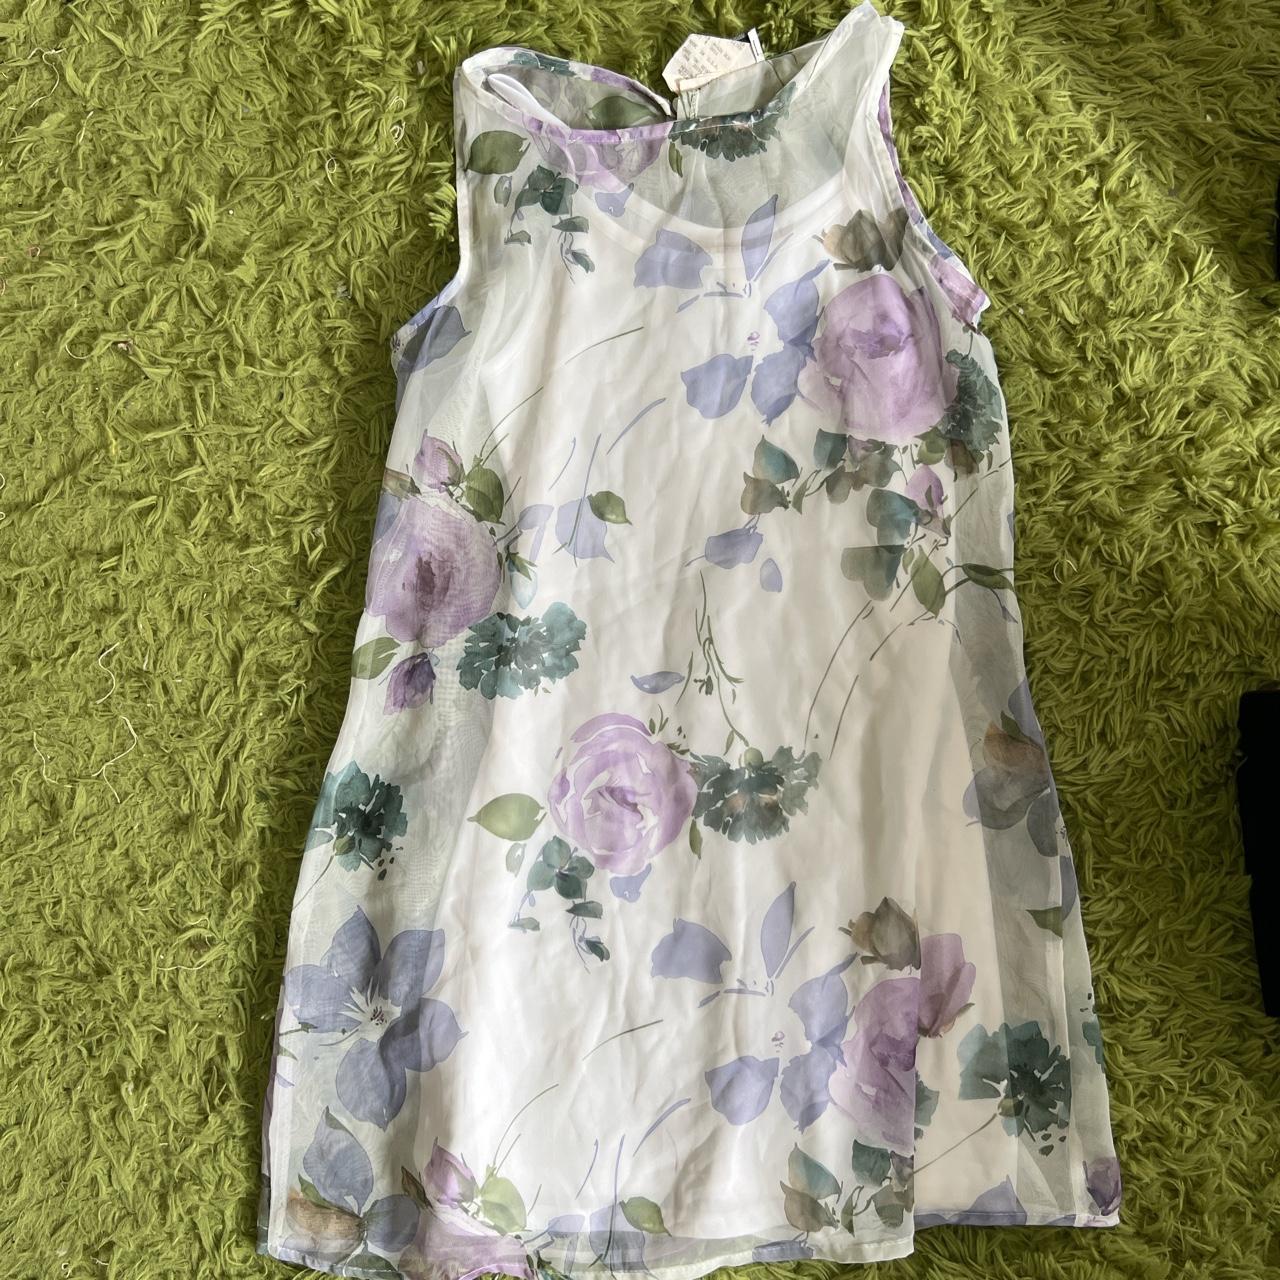 Joules Women's White and Purple Dress (2)